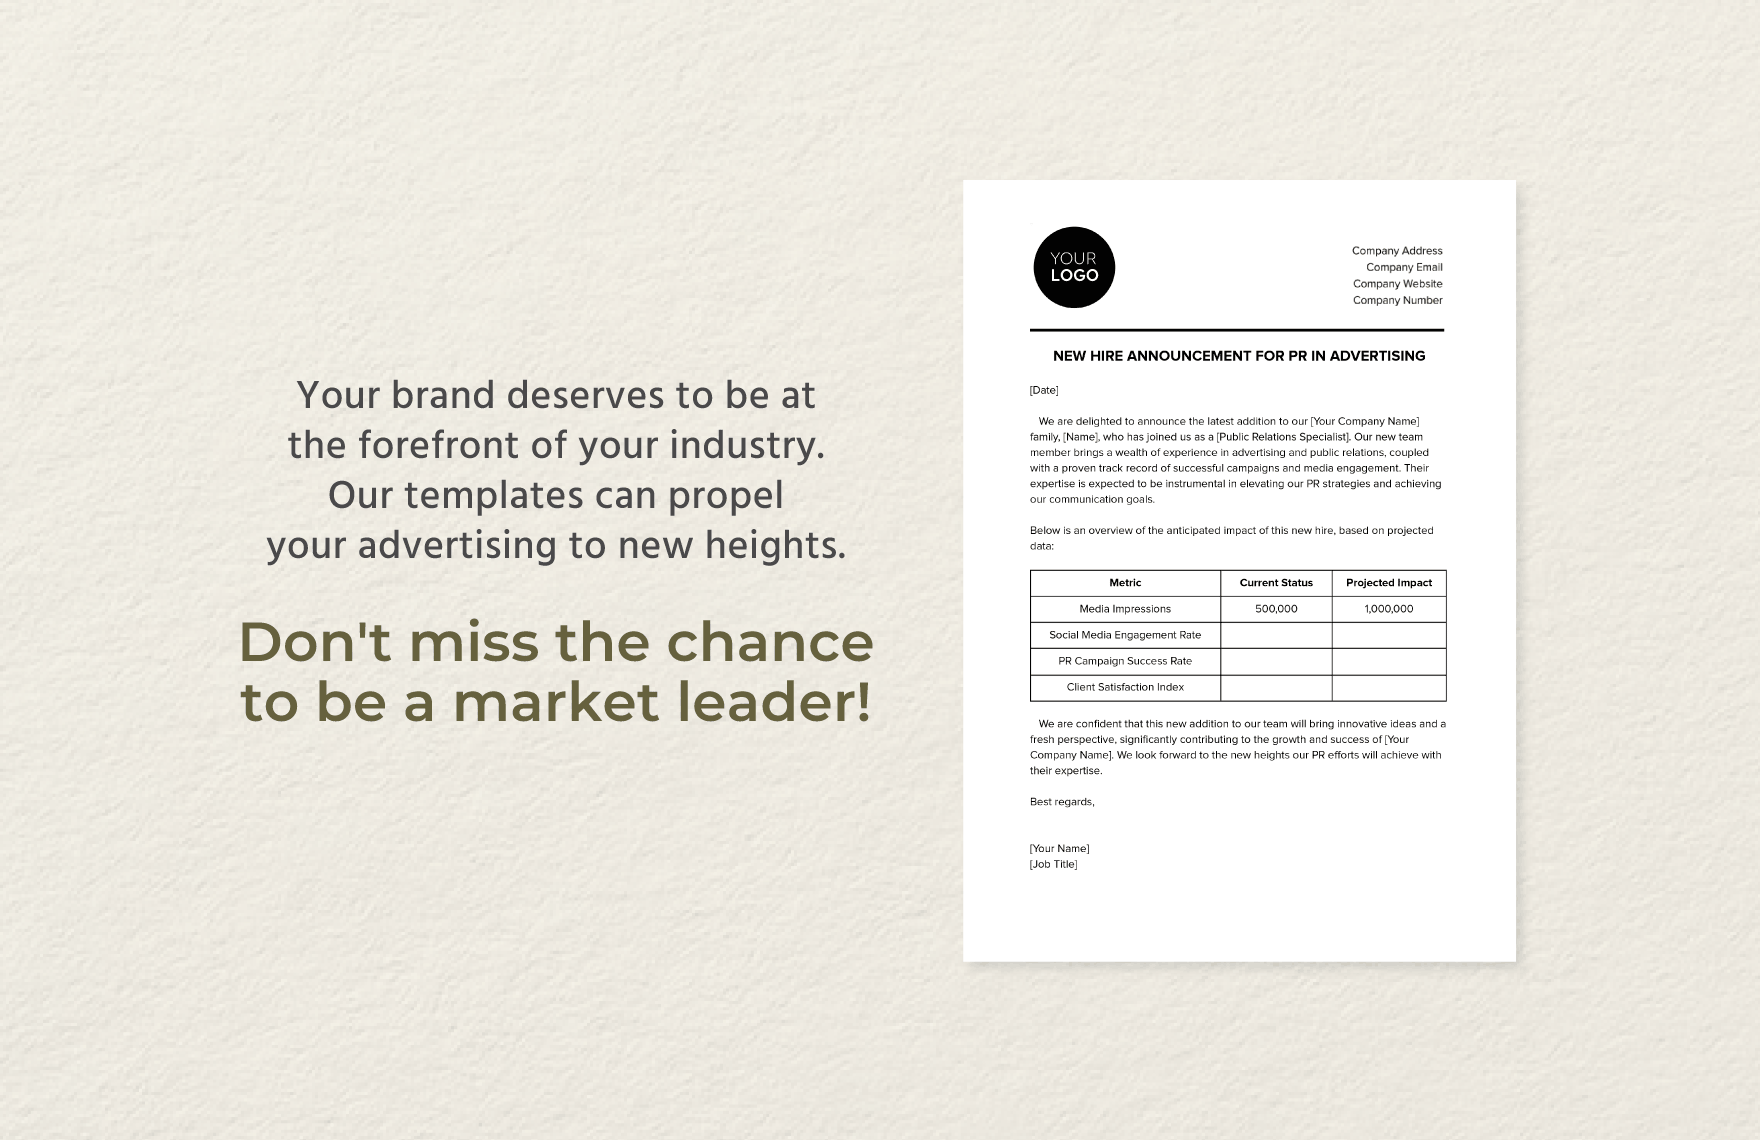 New Hire Announcement for PR in Advertising Template